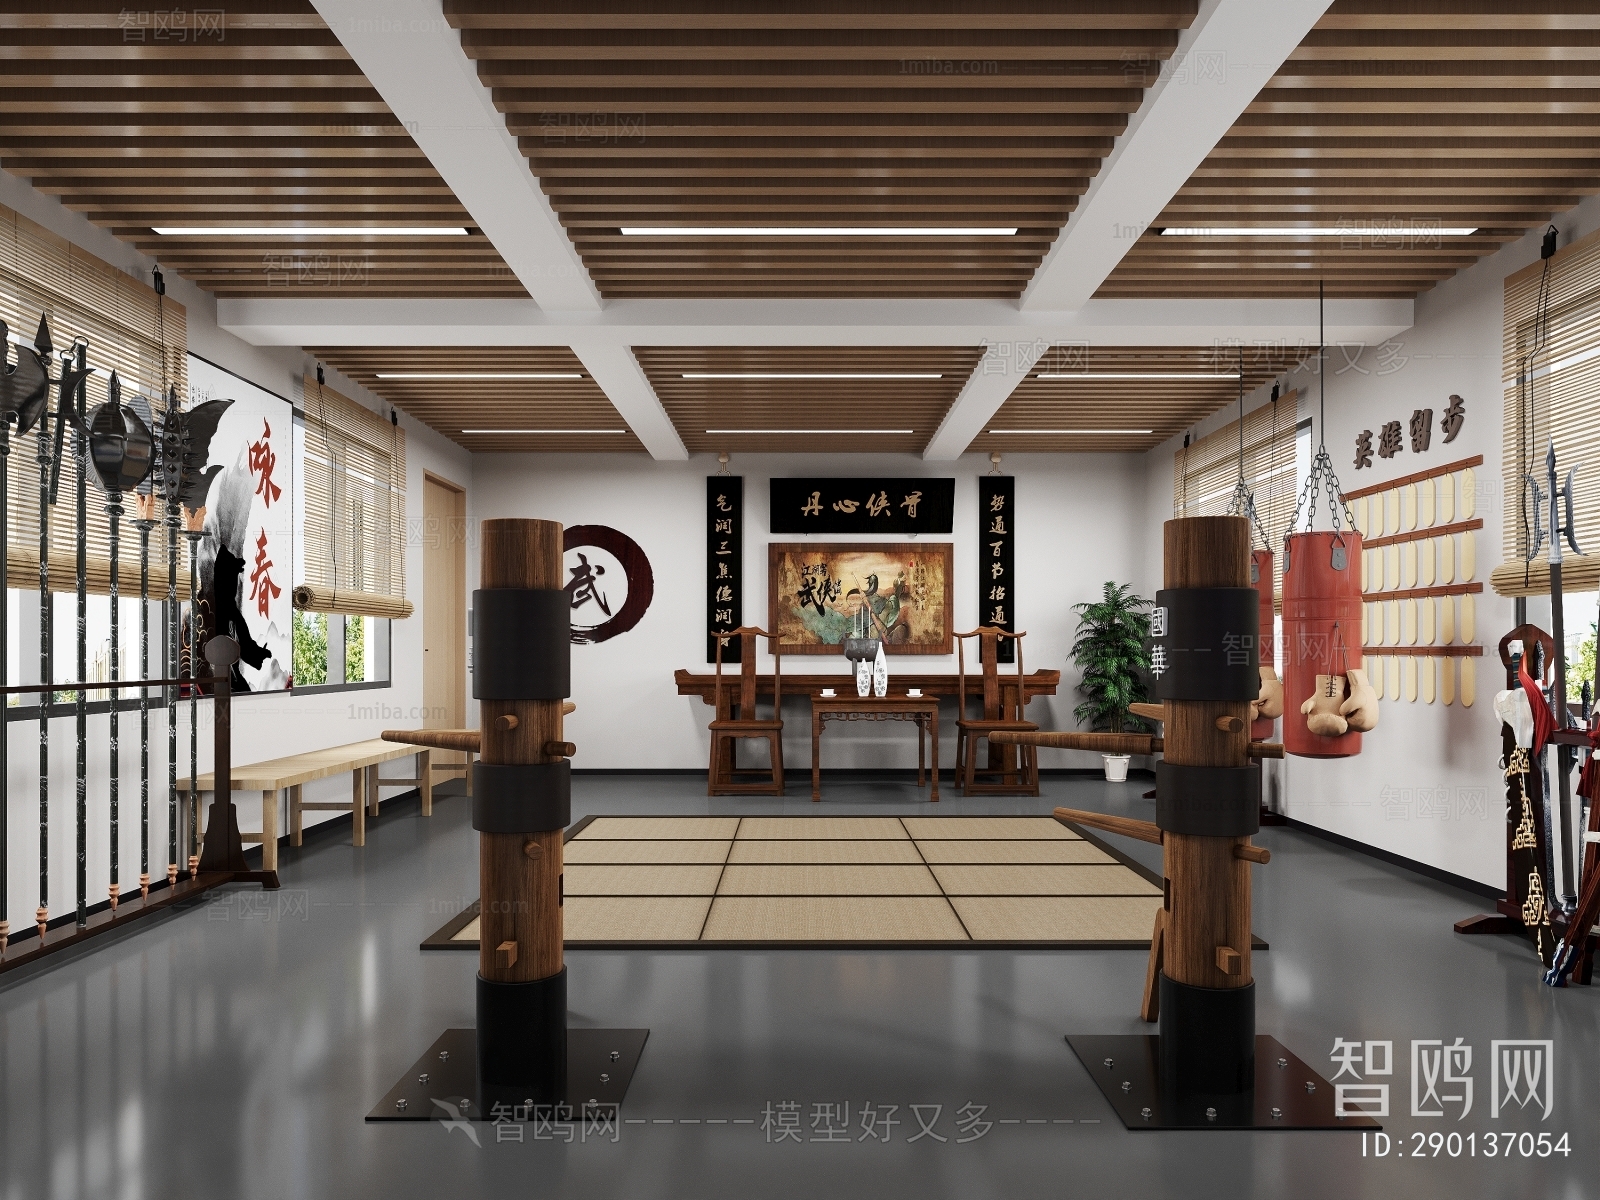 New Chinese Style Gym